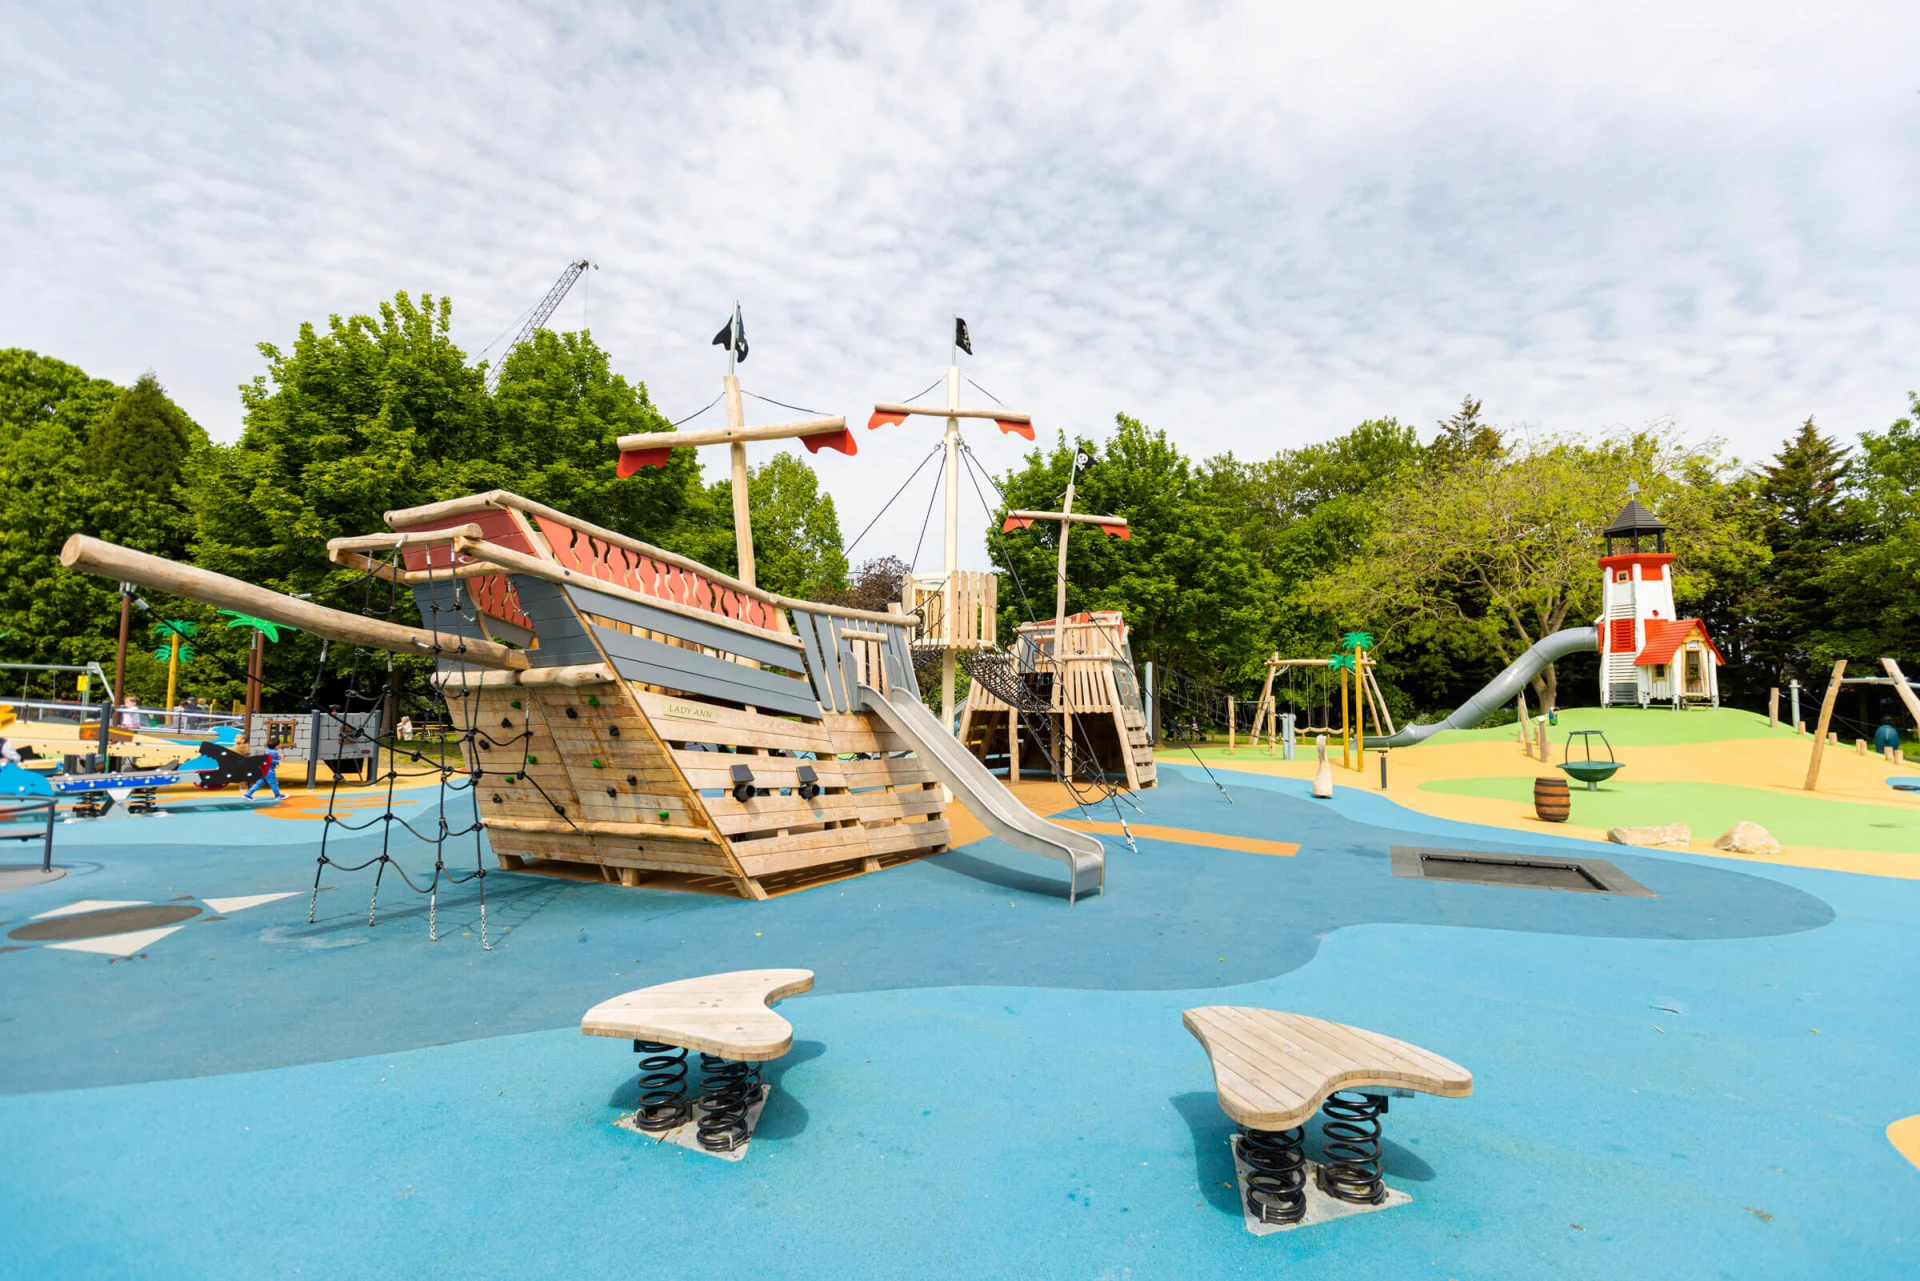 a playground with a wooden pirate ship and lighthouse playground sculpture